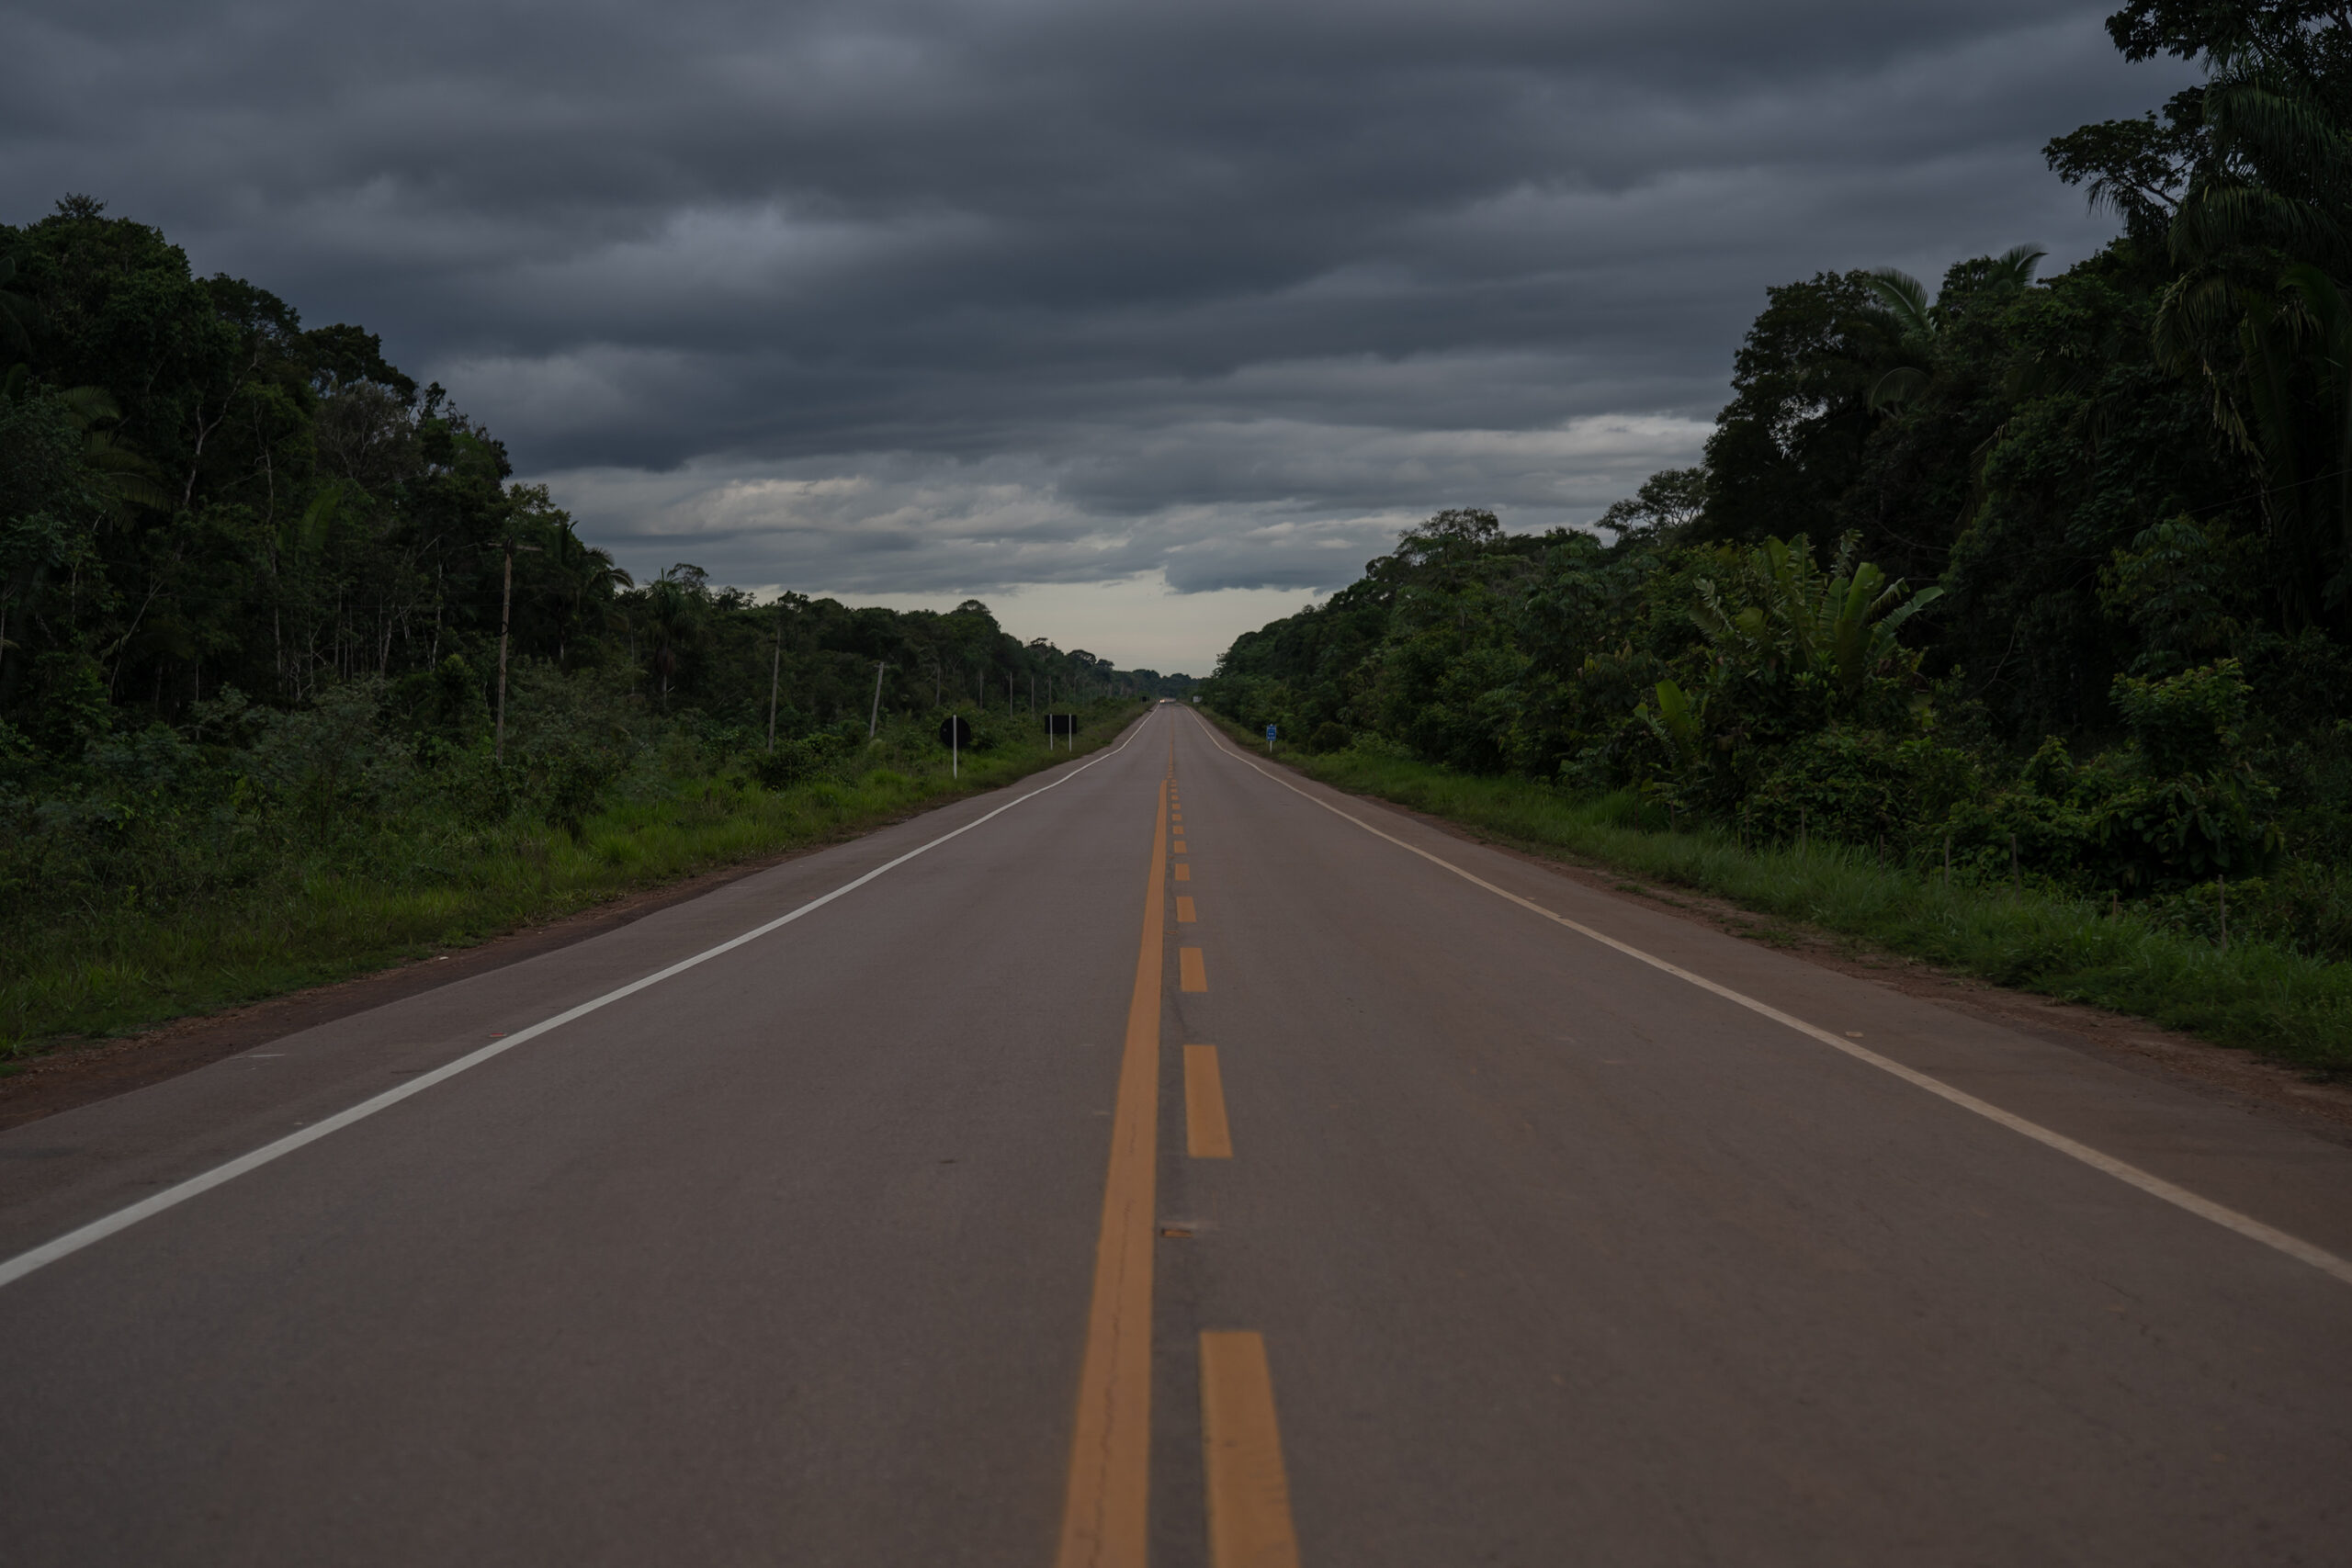 The federal highway BR-230 (the “Transamazônica”) was constructed in